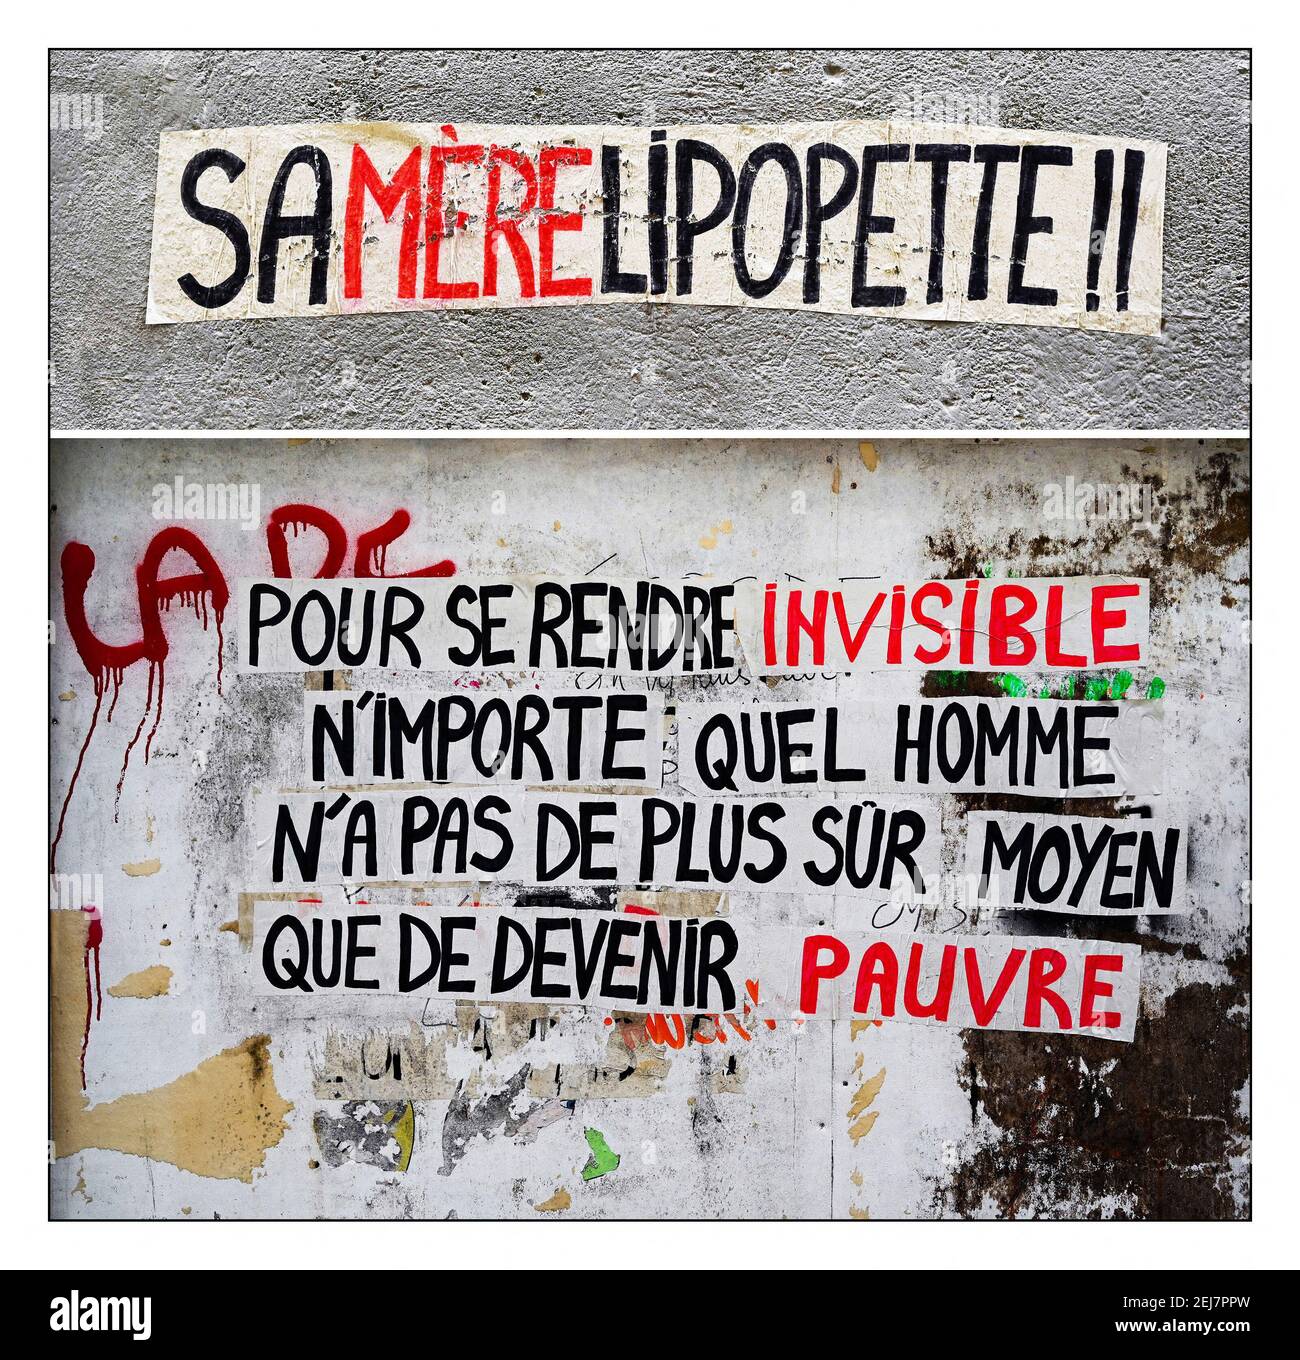 Tags and collages on the walls of the city showing the exasperation and fed up with the sanitary measures and restrictions linked to covid-19. Collage of two messages: 'samerlipopette' and 'to make himself invisible, any man has no surer means than to become poor'. Granville, France on February 20, 2021. Photo Desfoux JY/ANDBZ/ABACAPRESS.COM Stock Photo